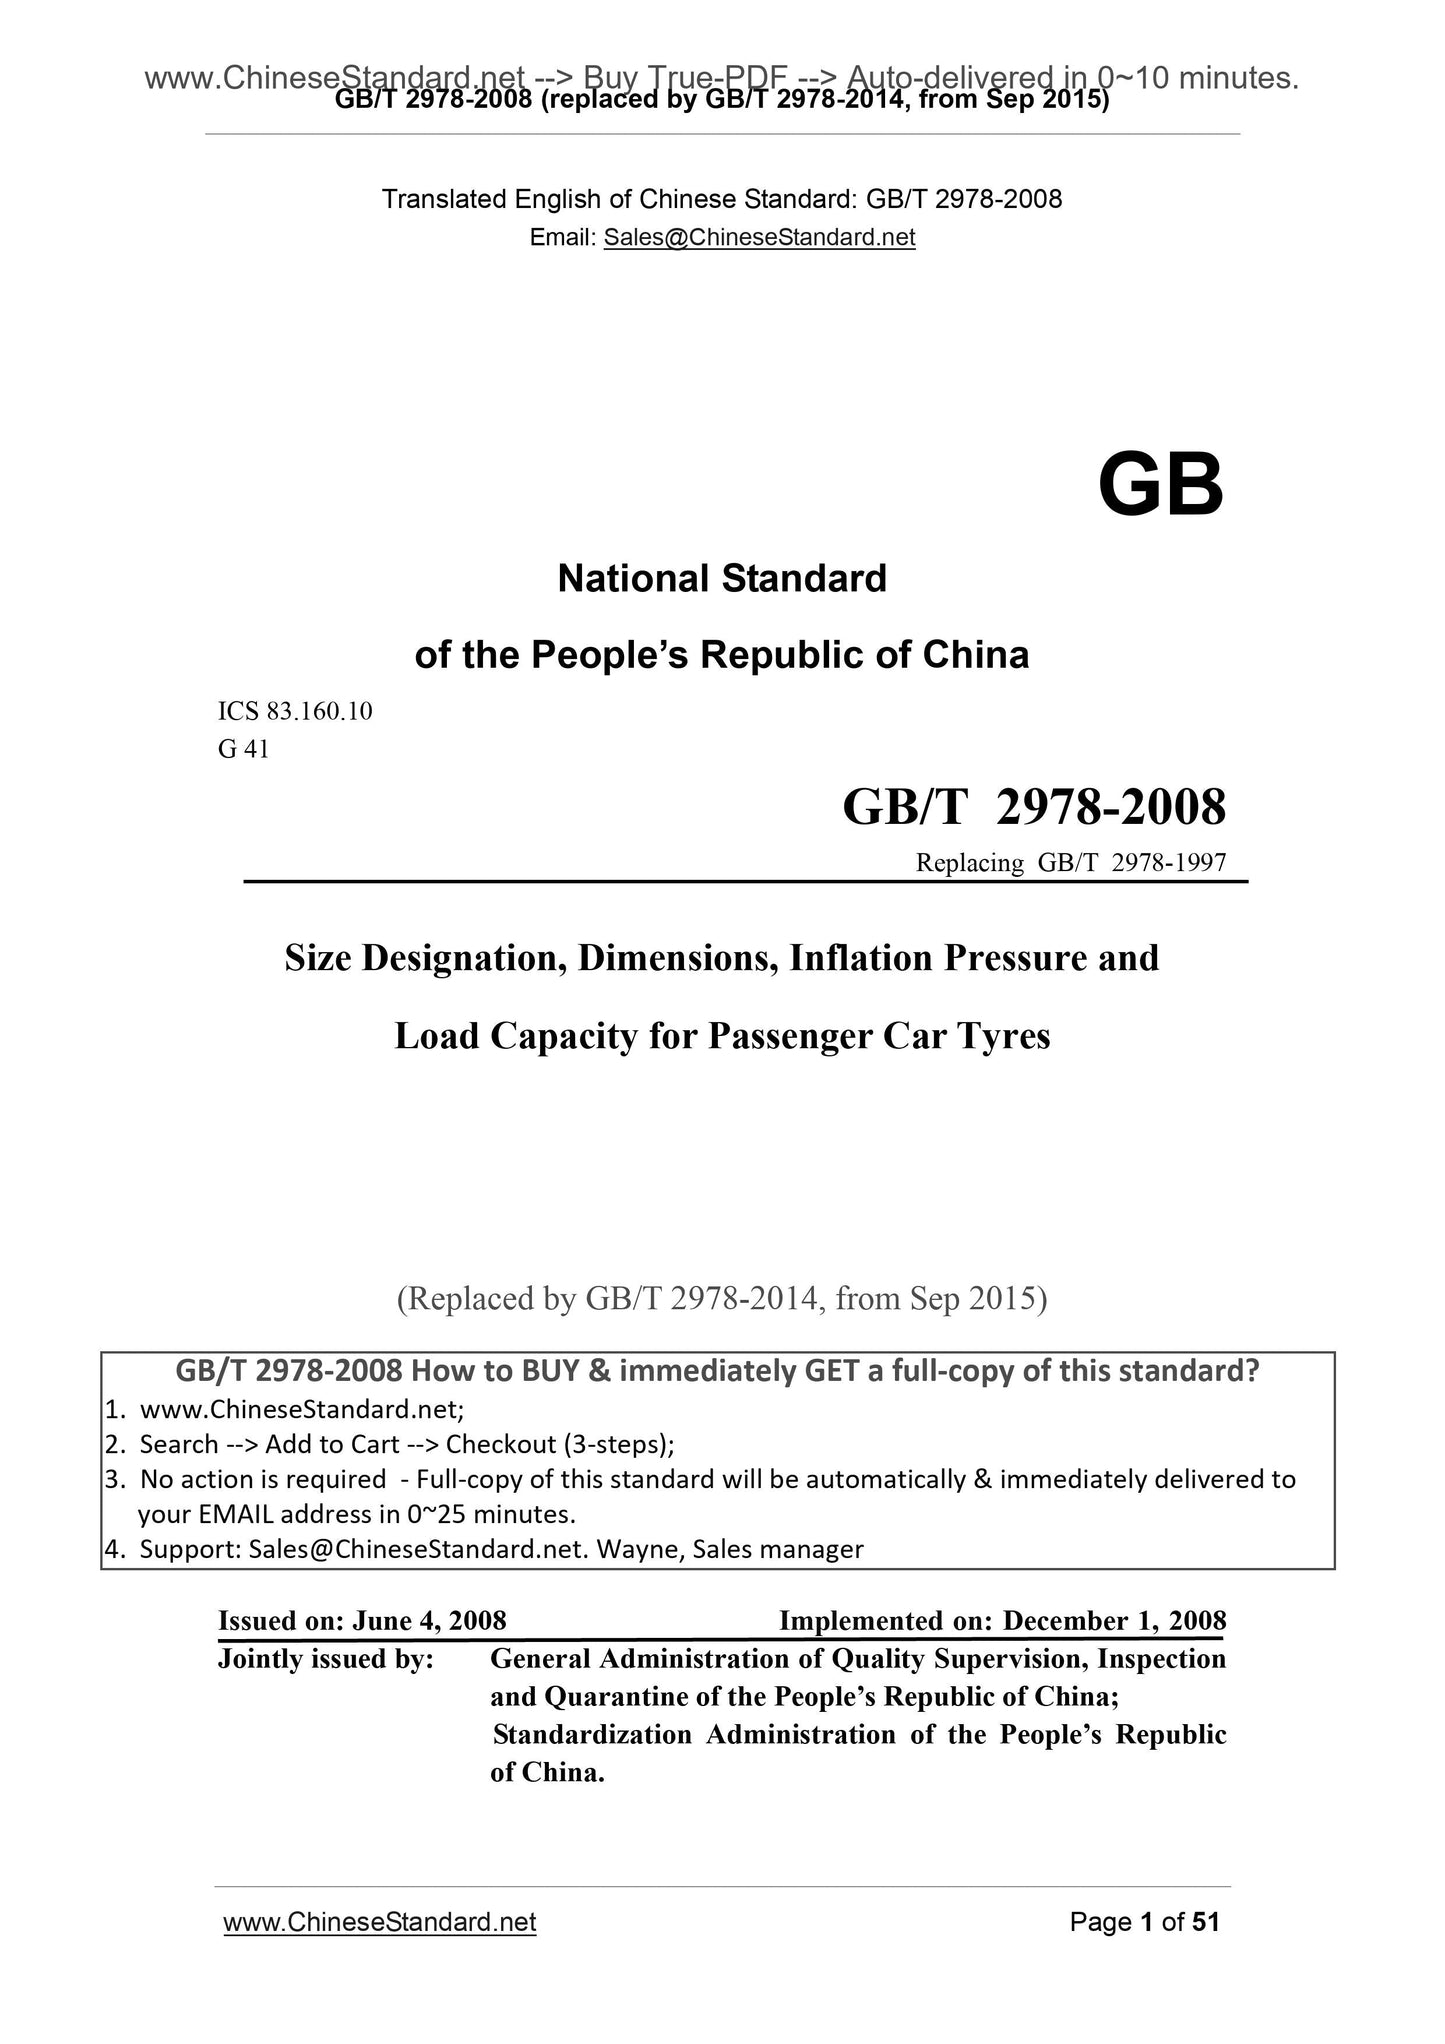 GB/T 2978-2008 Page 1